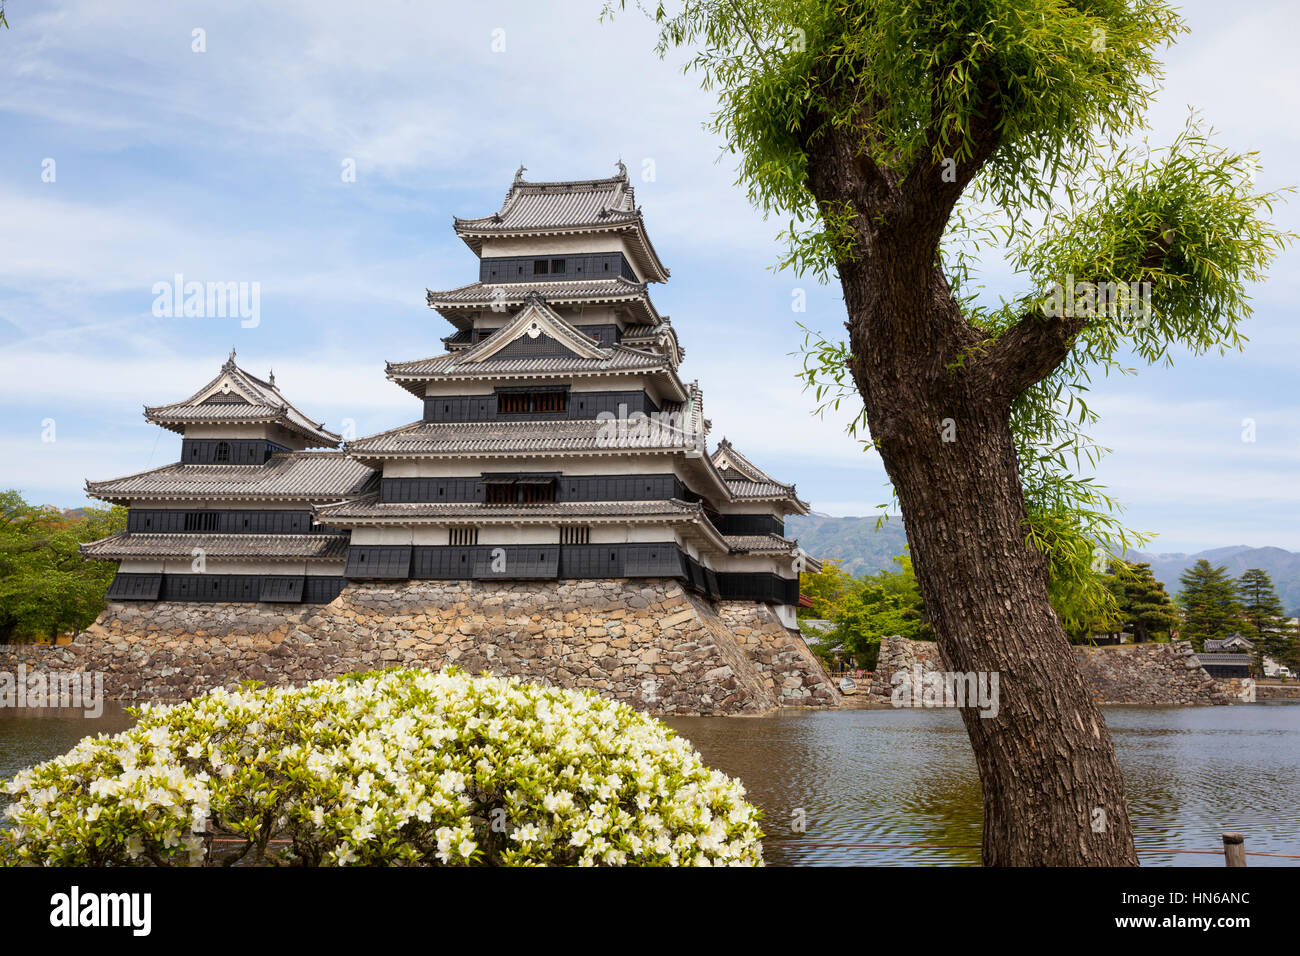 Matsumoto, Japan - May 13, 2012: The keep and moat of Matsumoto castle in Nagano Prefecture, viewed from the surrounding park. The castle is designate Stock Photo